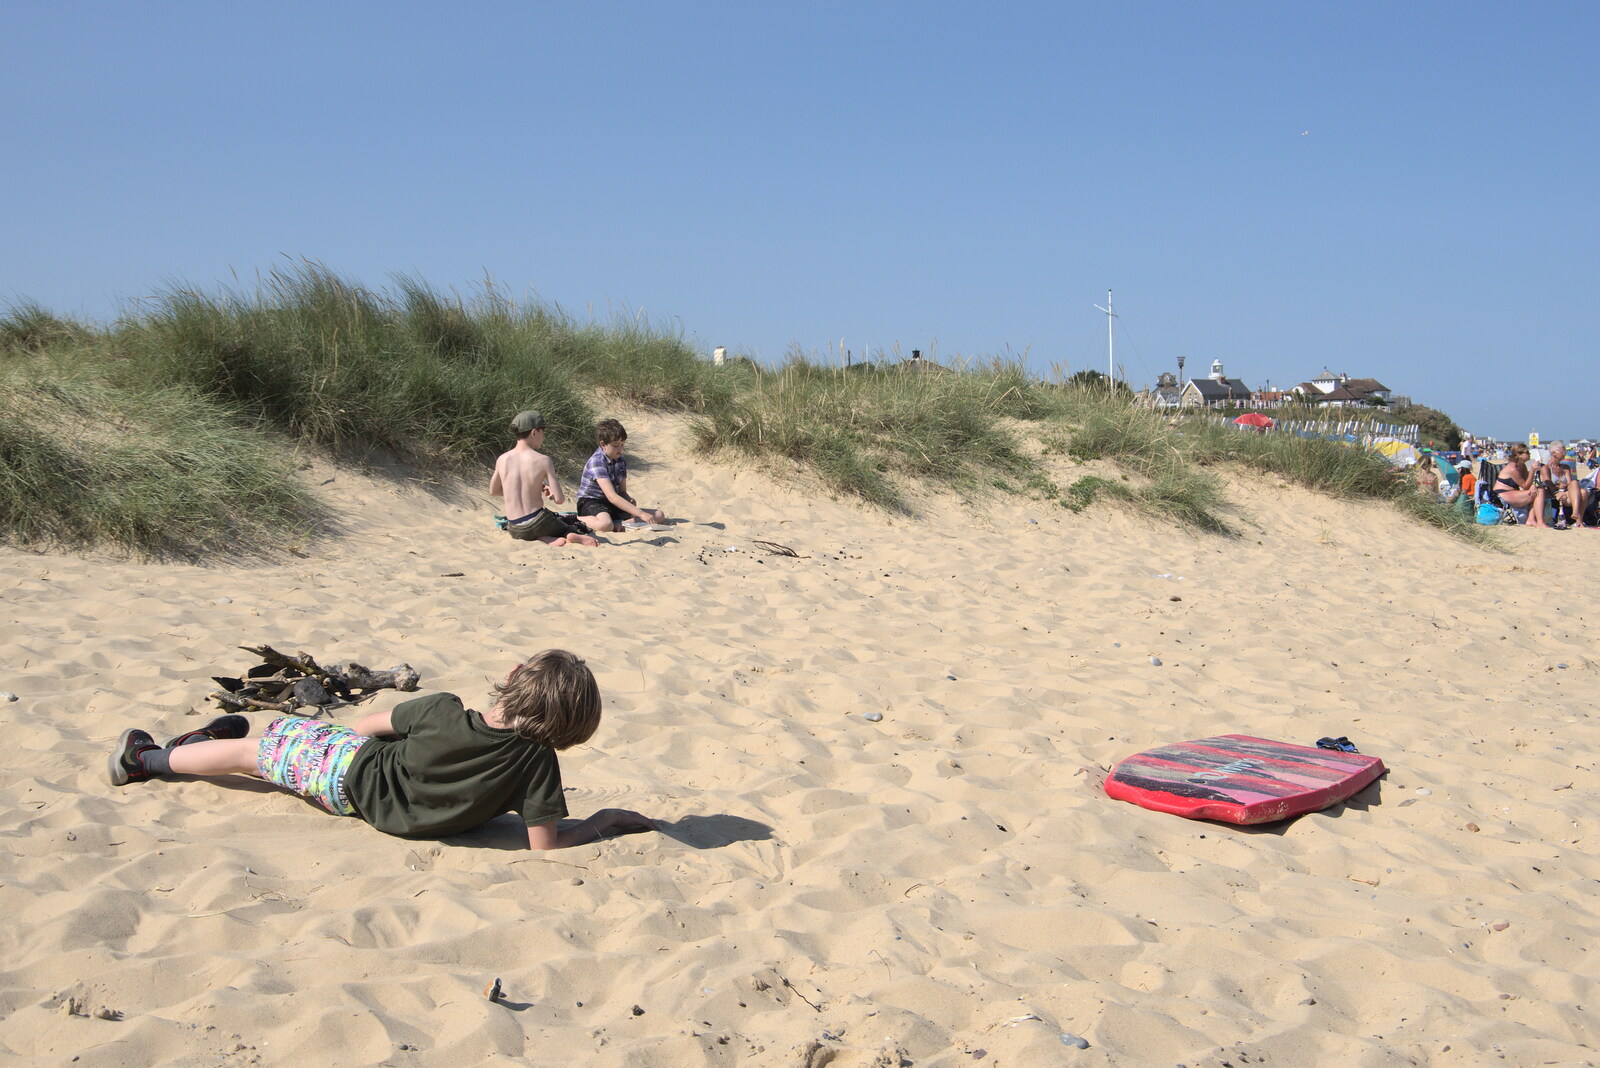 Harry pokes around in the sand from A Day on the Beach, Southwold, Suffolk - 18th July 2021